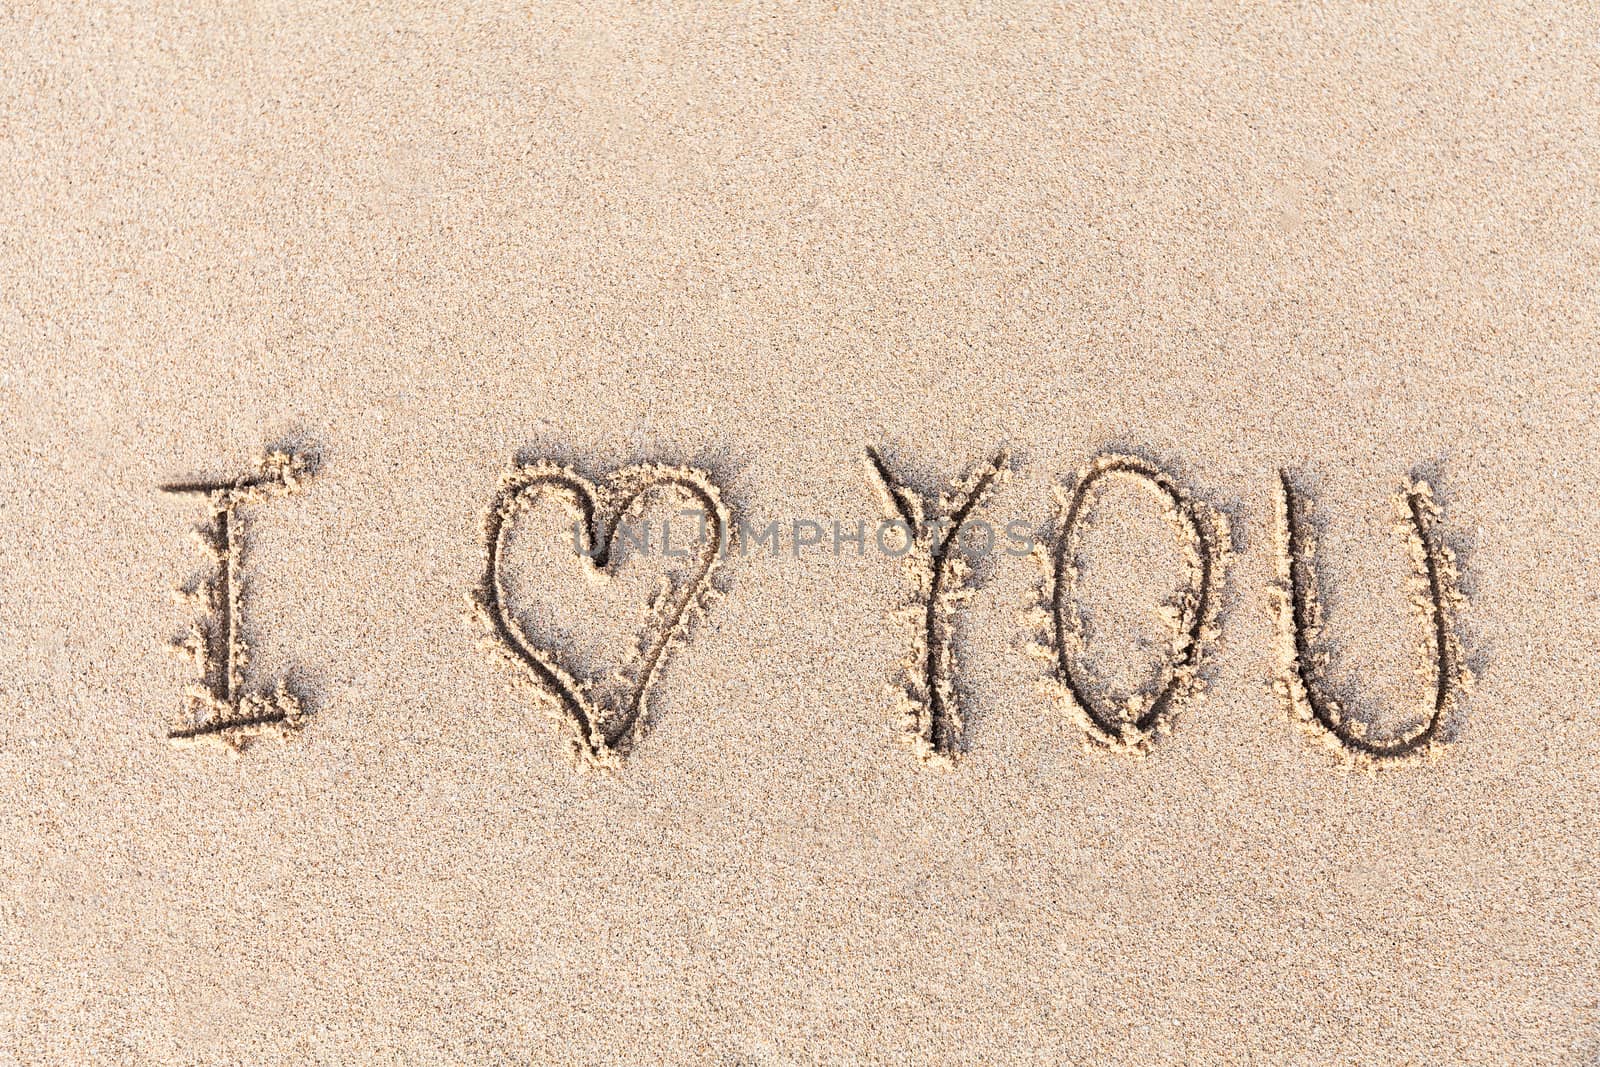 I love you handwritten in sand for natural by jame_j@homail.com